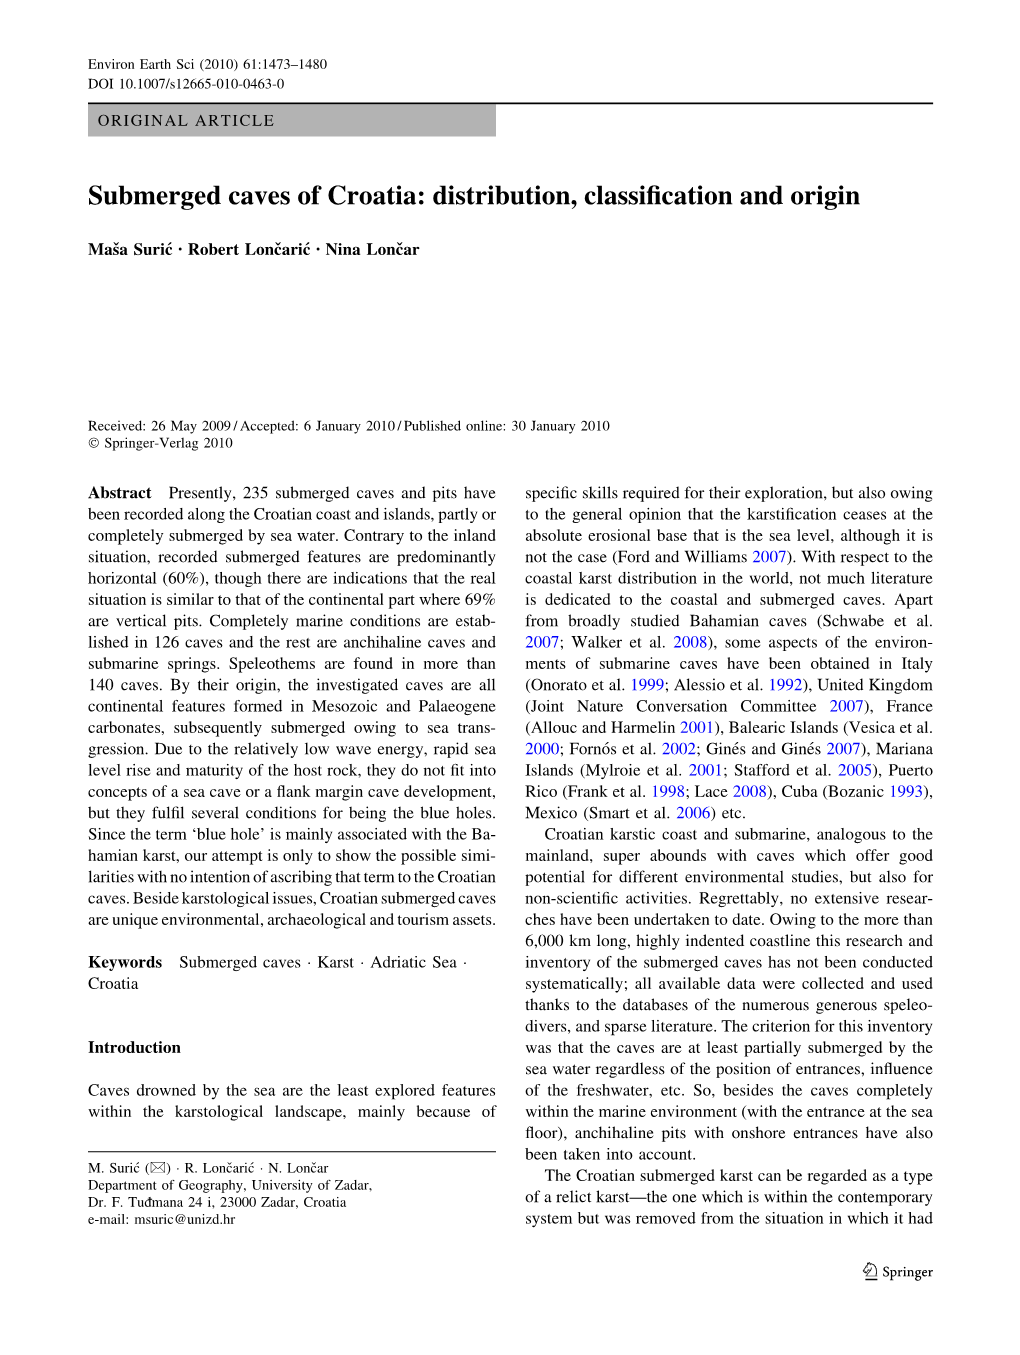 Submerged Caves of Croatia: Distribution, Classiﬁcation and Origin